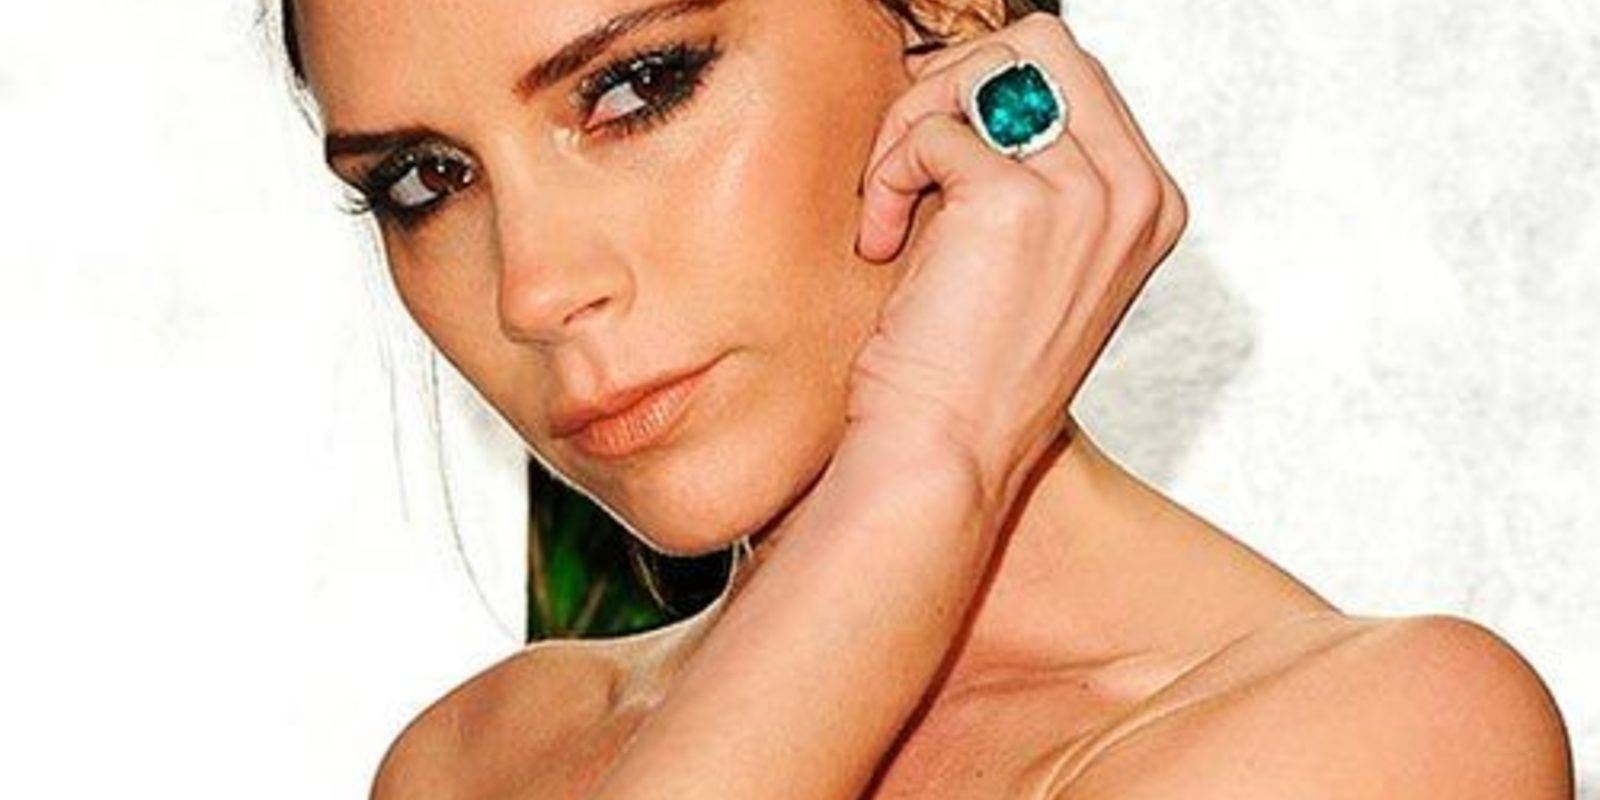 Victoria Beckham's Engagement Ring Collection Intended For Victoria Beckham Wedding Rings (View 3 of 14)